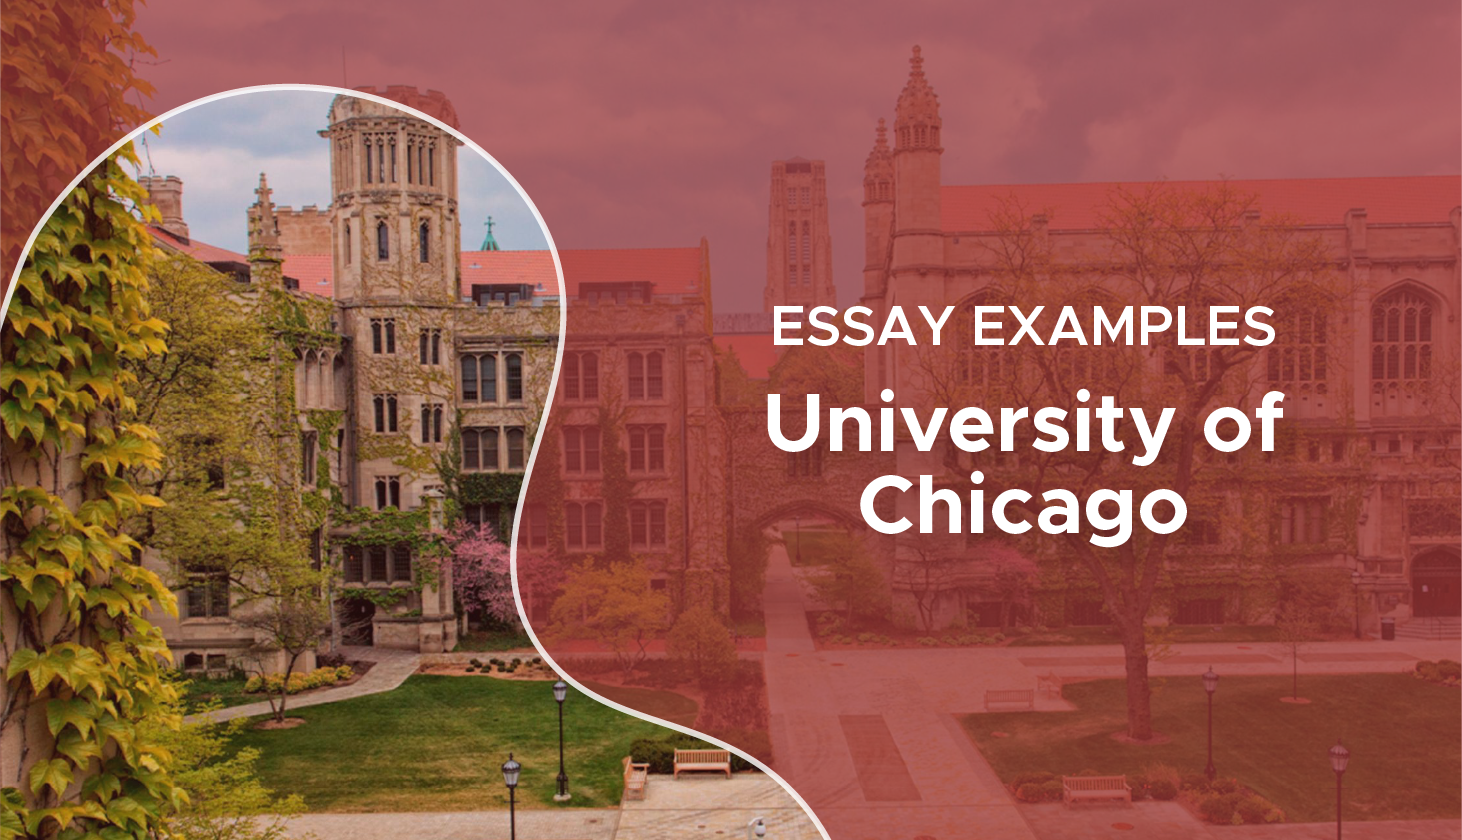 uchicago extended essay examples